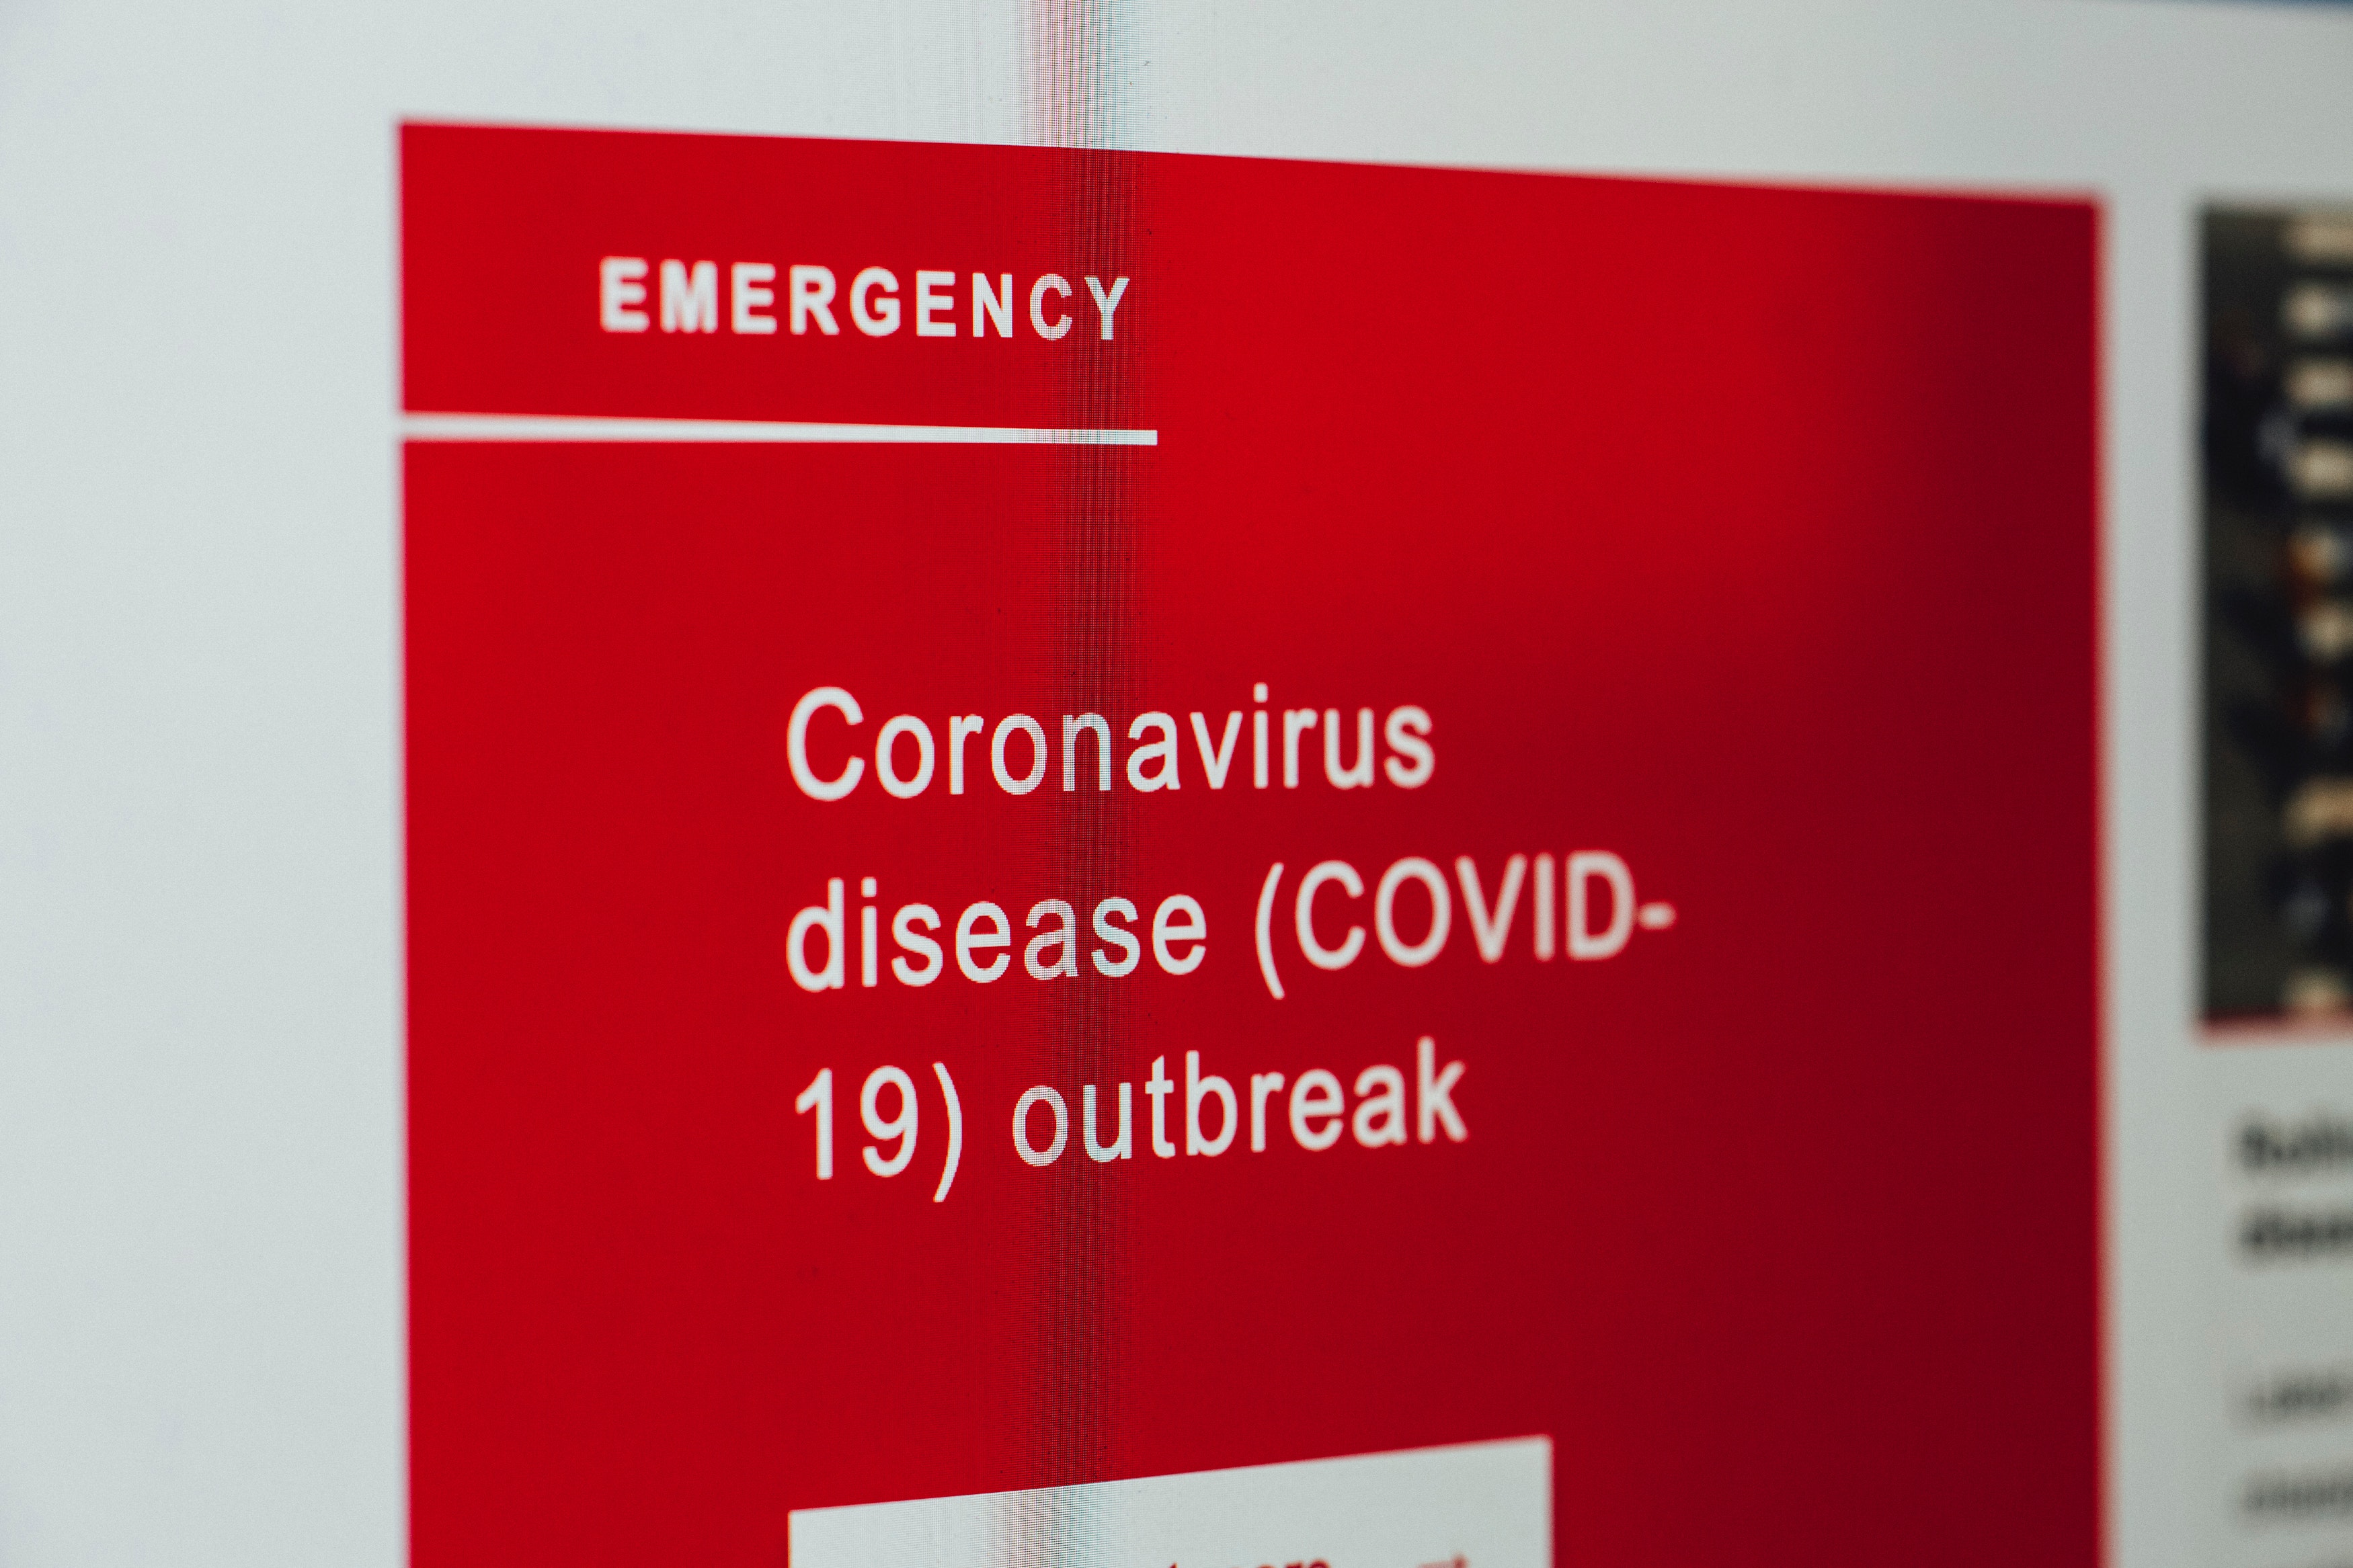 Why you should invest in Digital Marketing during the Corona virus outbreak